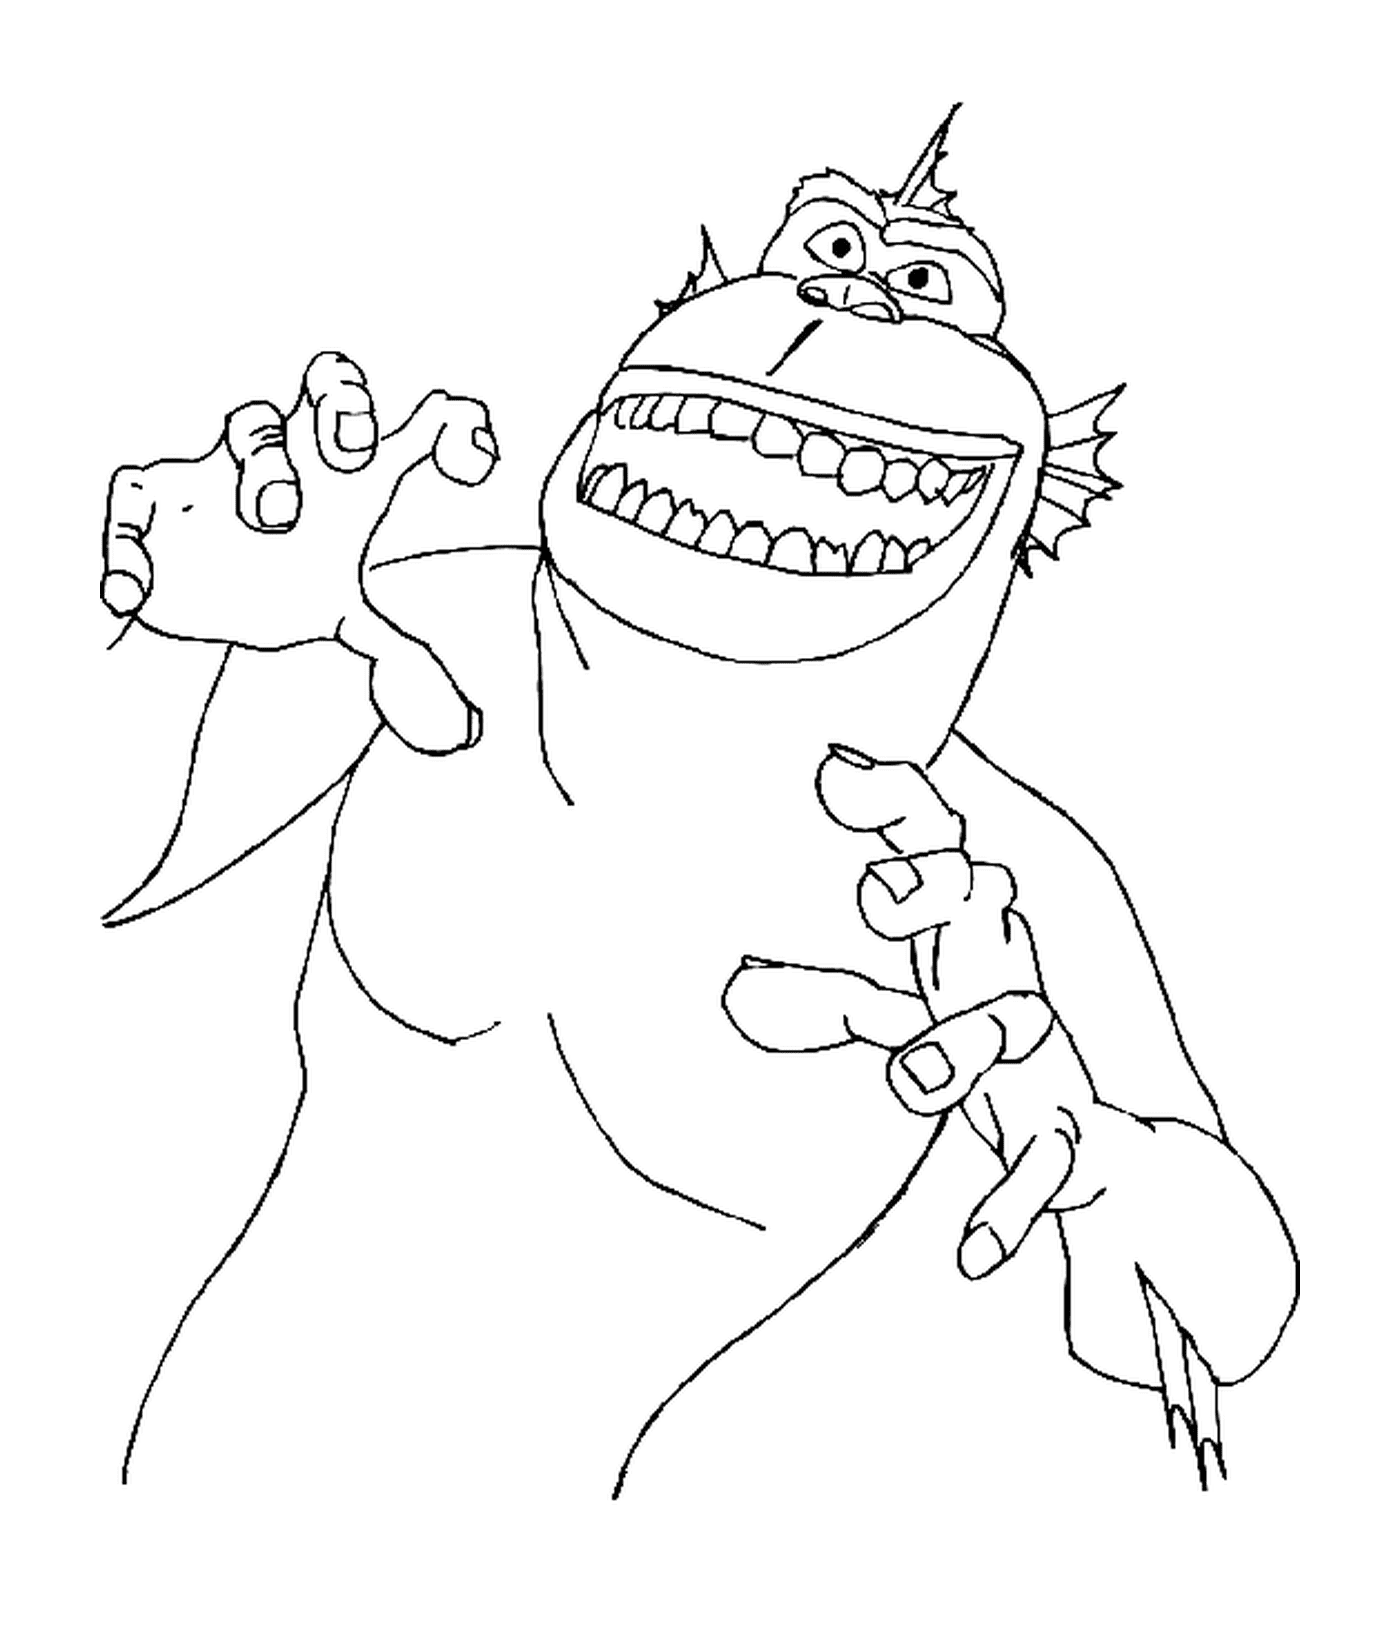  Drawing of the missing gorilla link holding something 